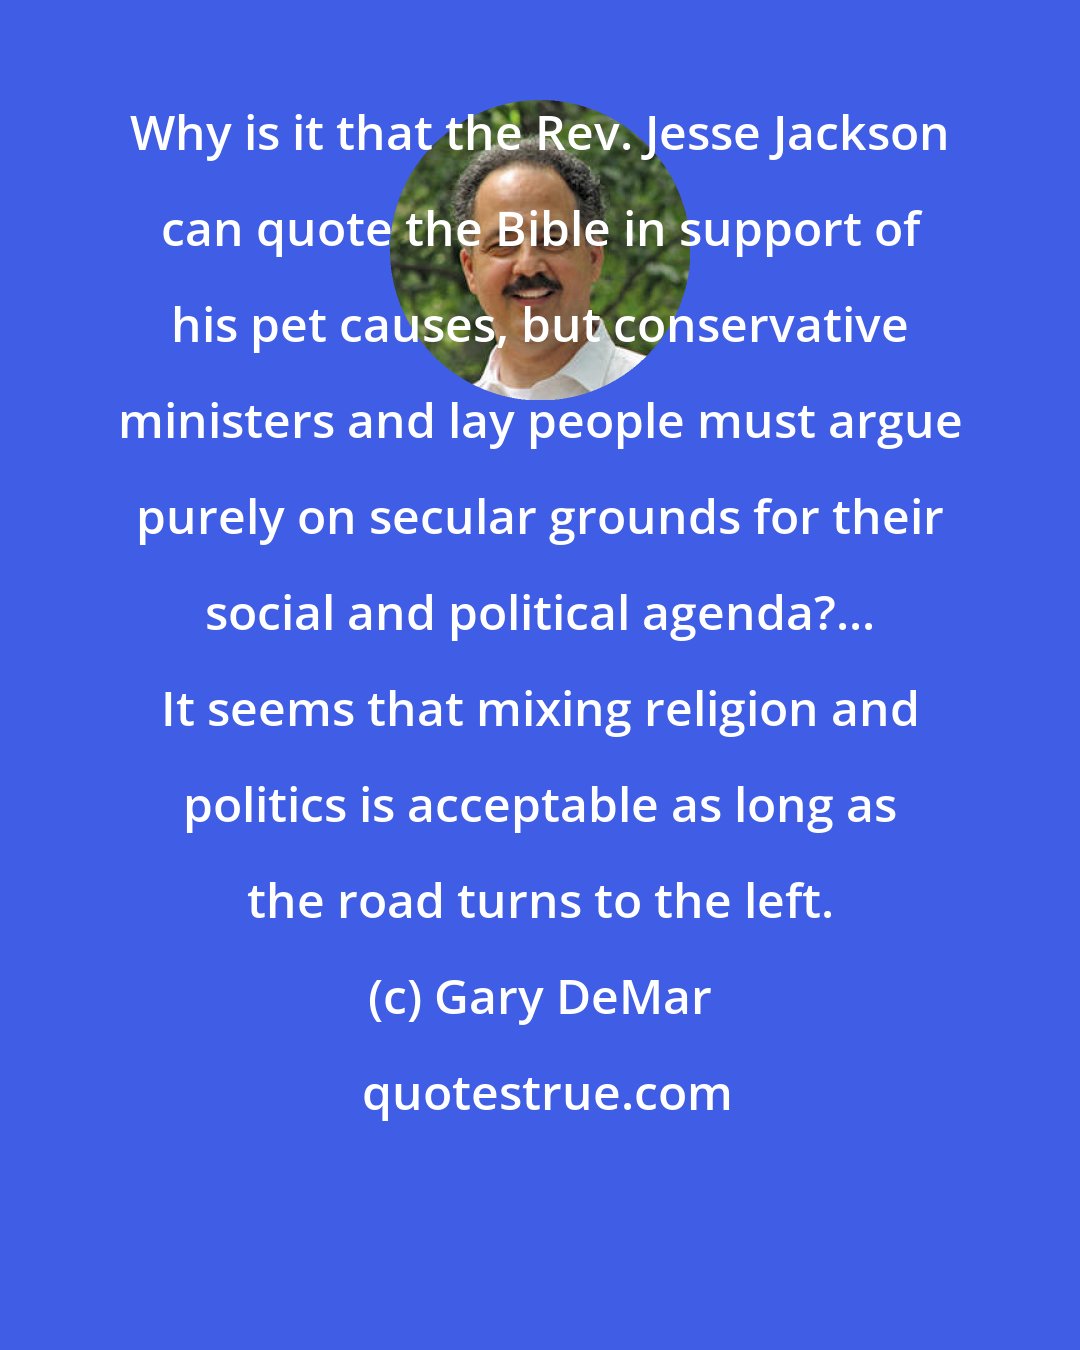 Gary DeMar: Why is it that the Rev. Jesse Jackson can quote the Bible in support of his pet causes, but conservative ministers and lay people must argue purely on secular grounds for their social and political agenda?... It seems that mixing religion and politics is acceptable as long as the road turns to the left.